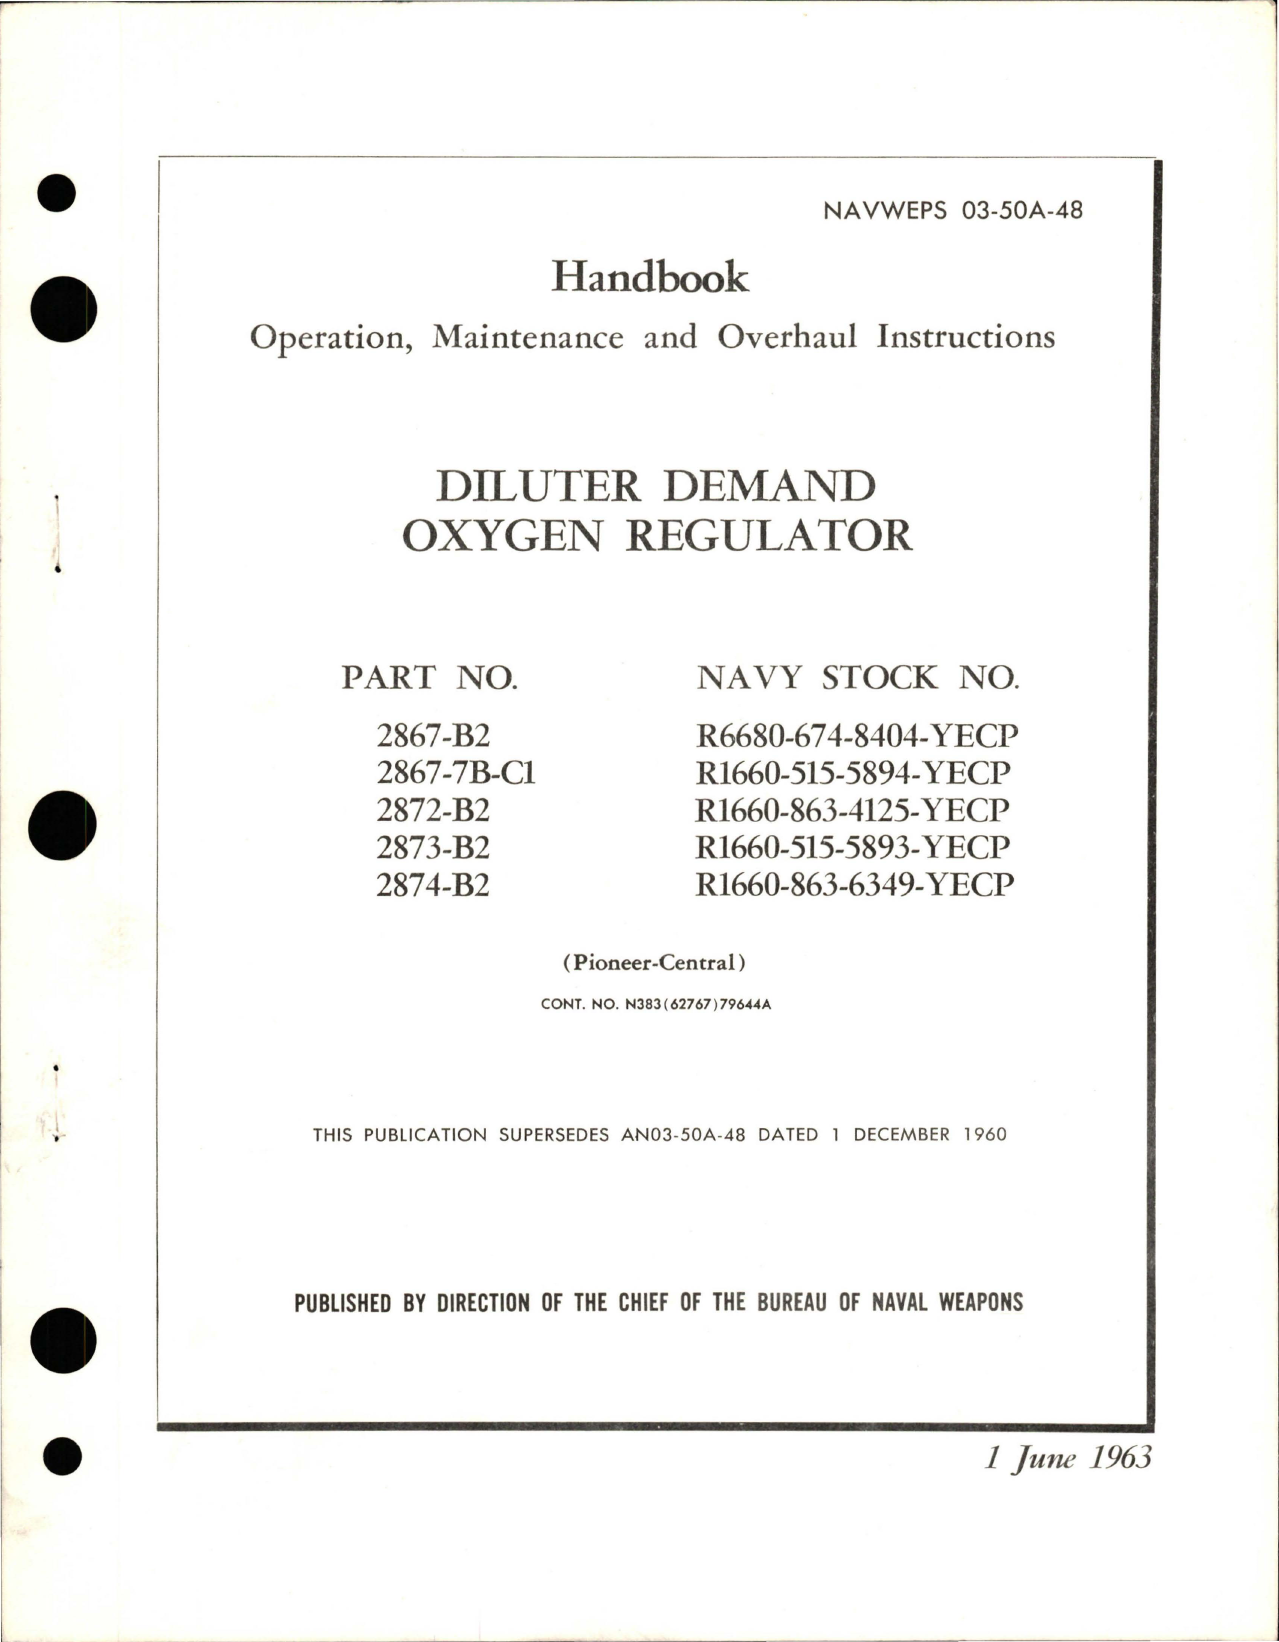 Sample page 1 from AirCorps Library document: Operation, Maintenance, and Overhaul Instructions for Diluter Demand Oxygen Regulator - Part 2867-B2, 2867-7B-C1, 2872-B2, 2873-B32, and 2874-B2